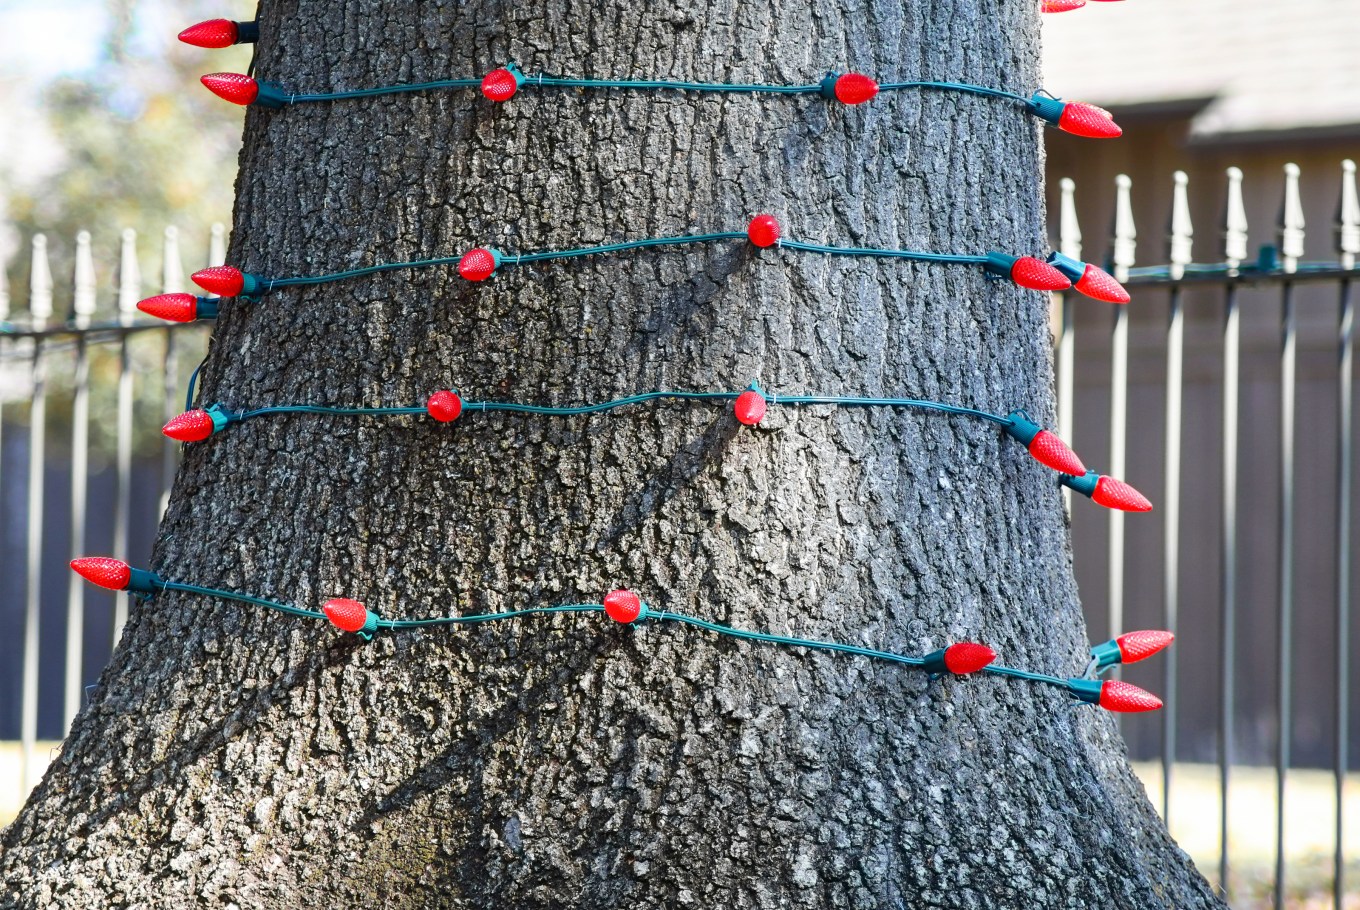 Tree trunk outside wrapped in red Christmas lights